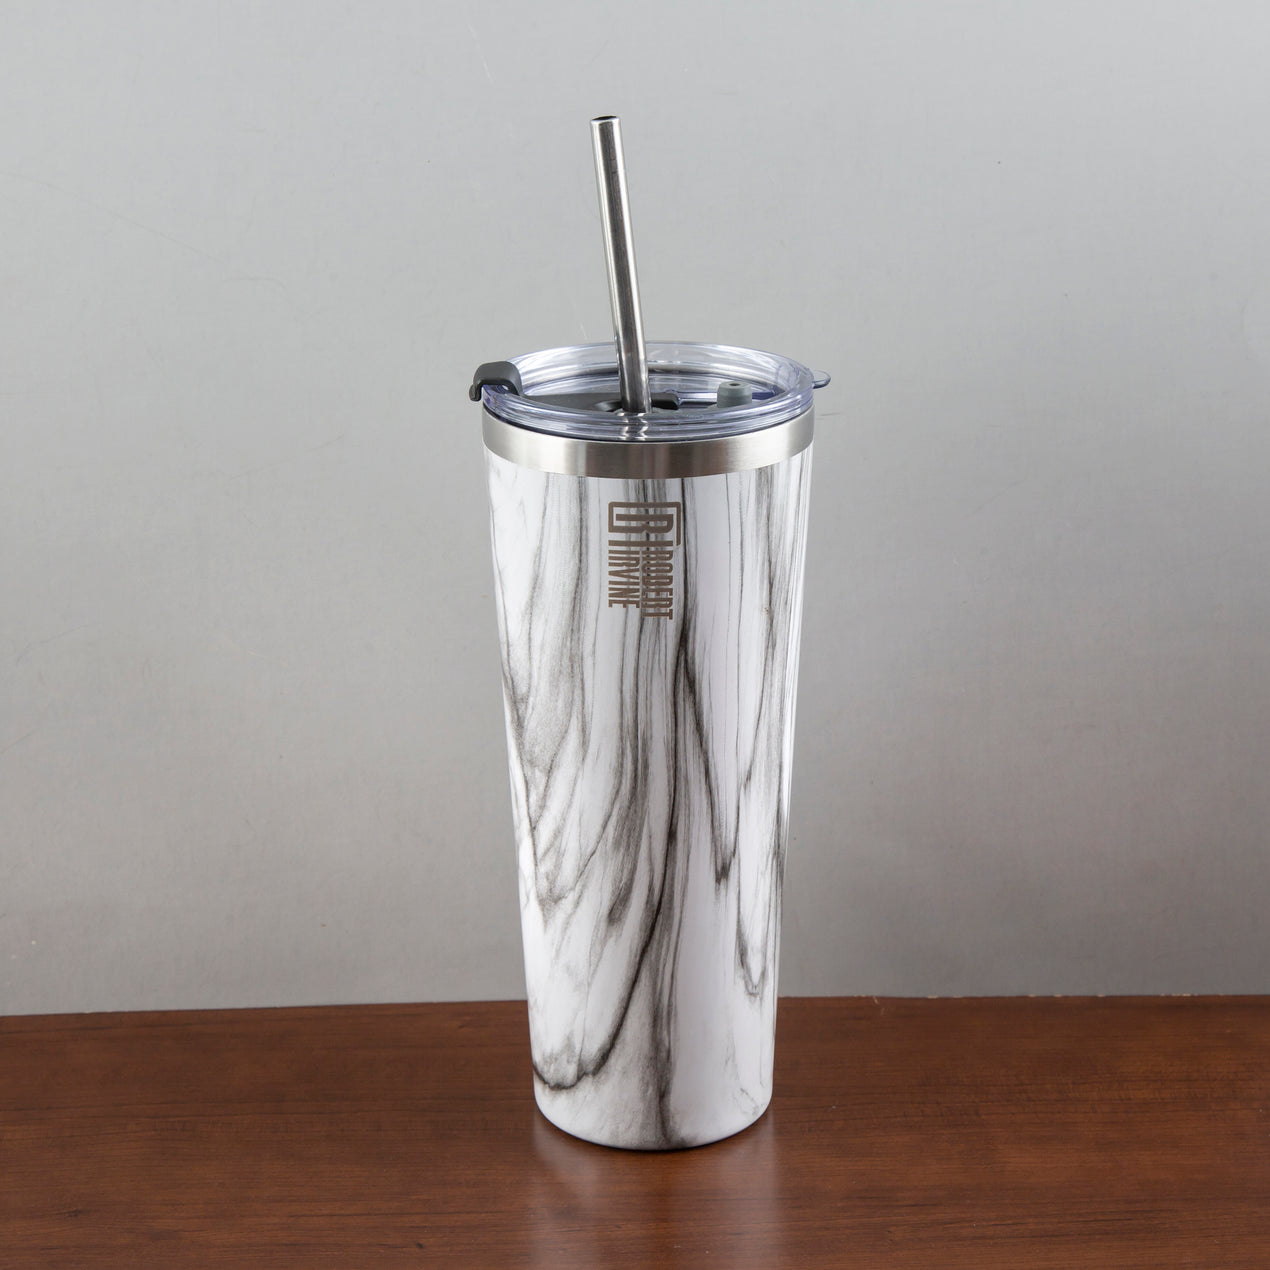 Insulated Tumblers with Straws